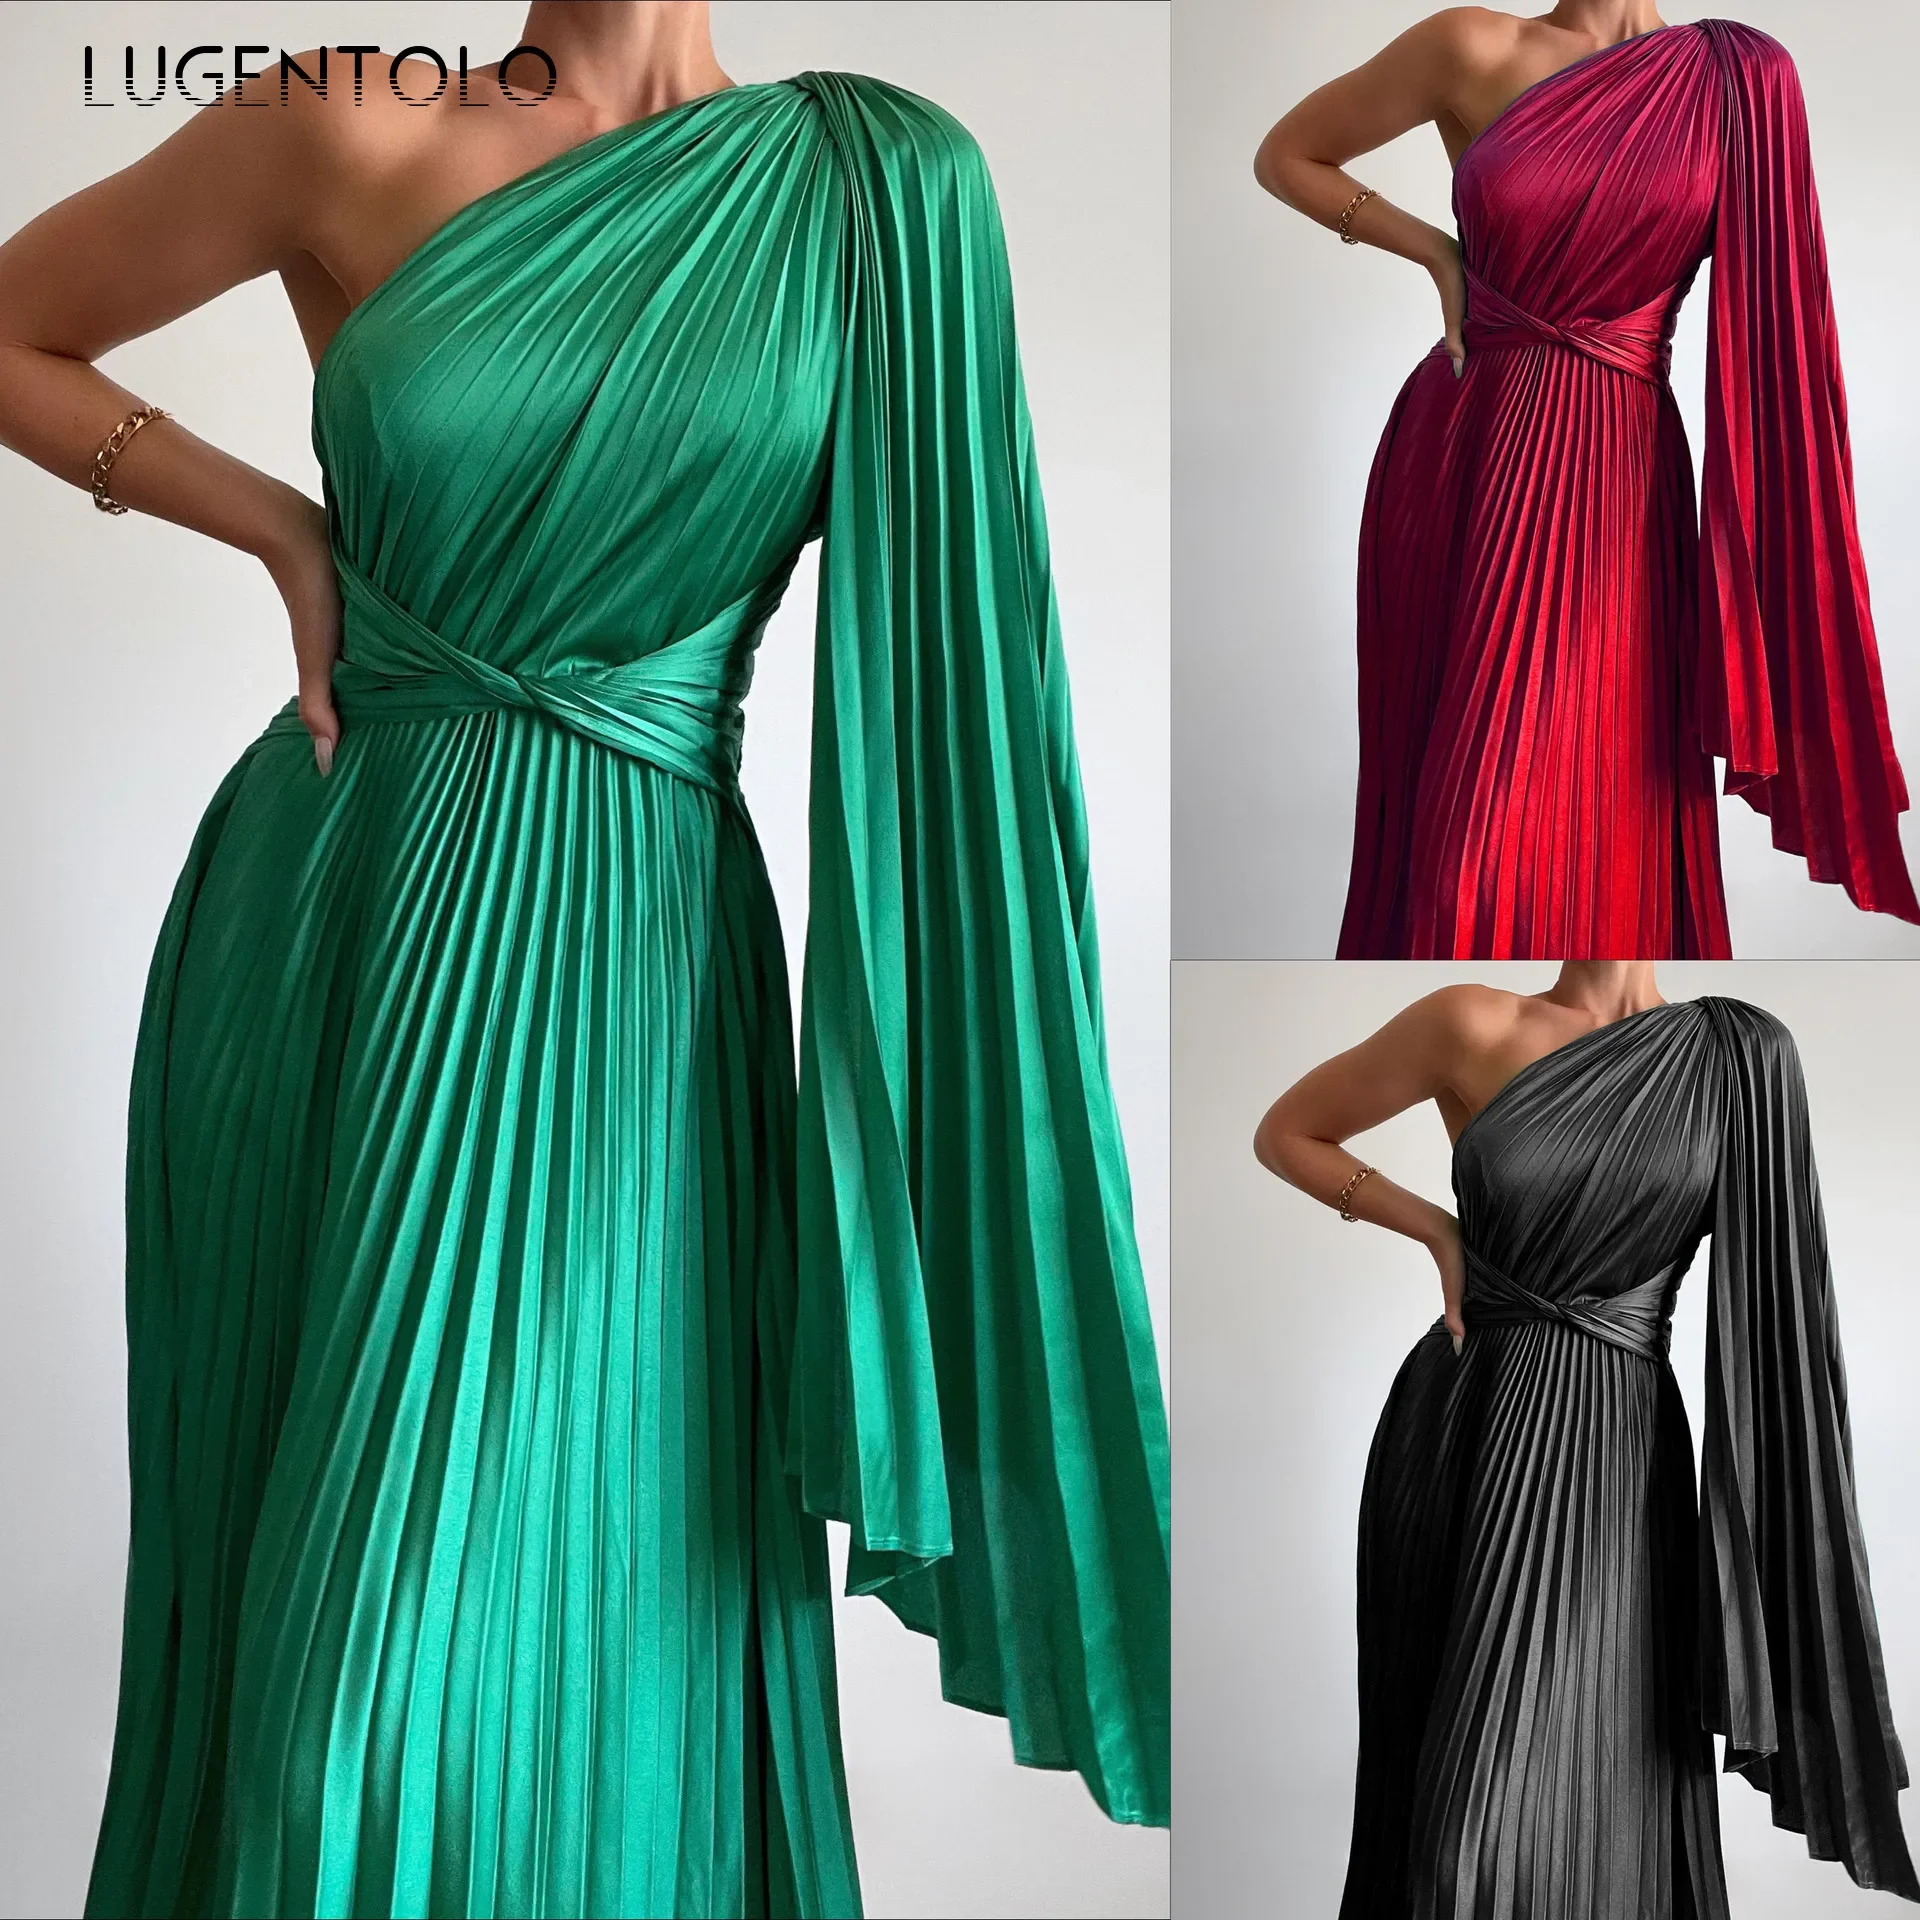 

Women Sexy Party Dress Sleeveless Slanted Shoulders Strapless Female Slim Pressed Pleats Big Swing Long Clothing Lugentolo